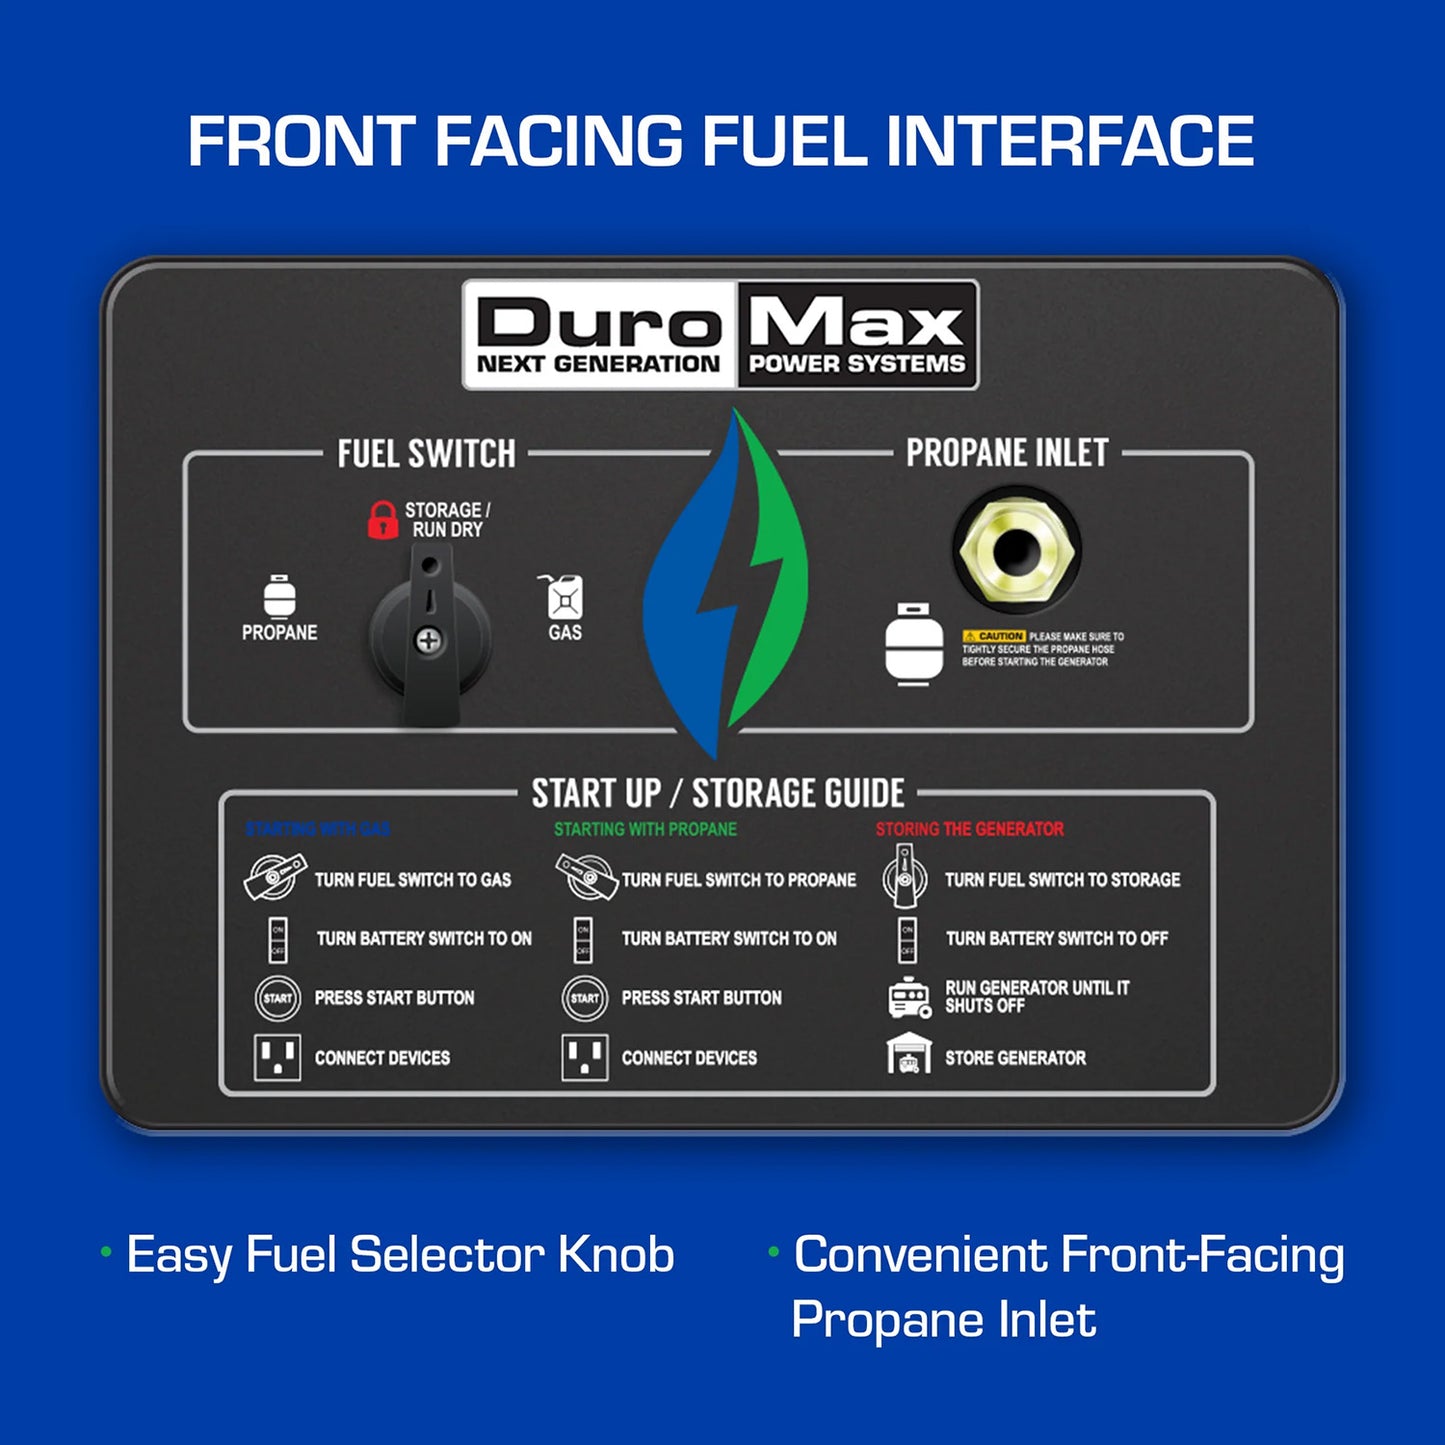 DuroMax XP13000EH Dual Fuel Portable Generator - Front Facing Fuel Interface